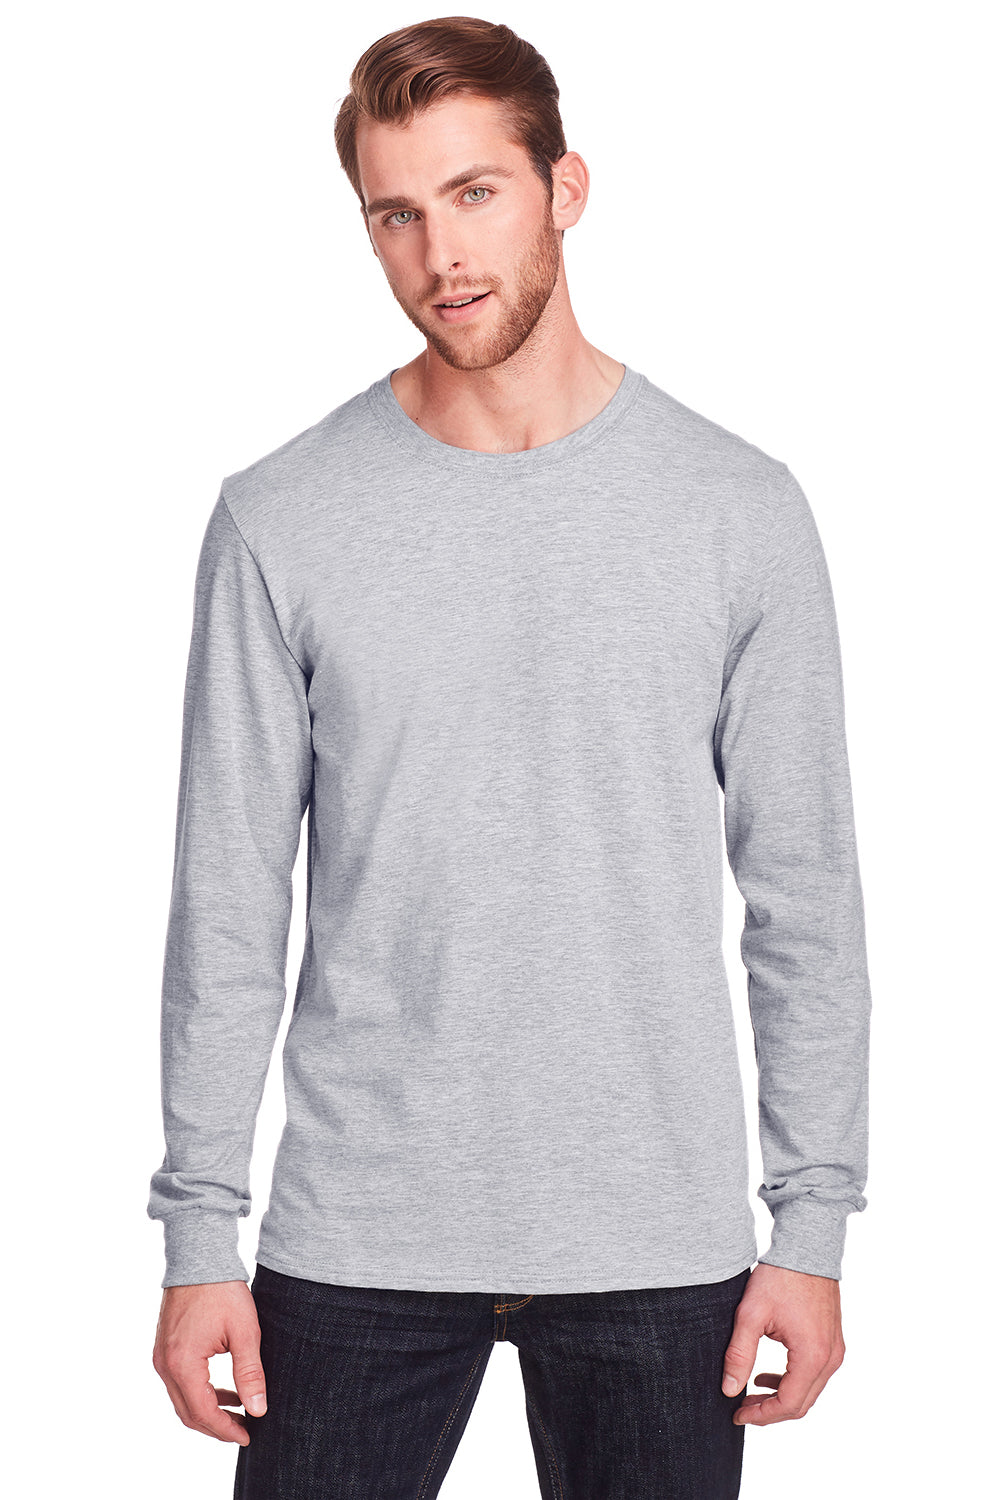 Fruit Of The Loom IC47LSR Mens Iconic Long Sleeve Crewneck T-Shirt Heather Grey Front